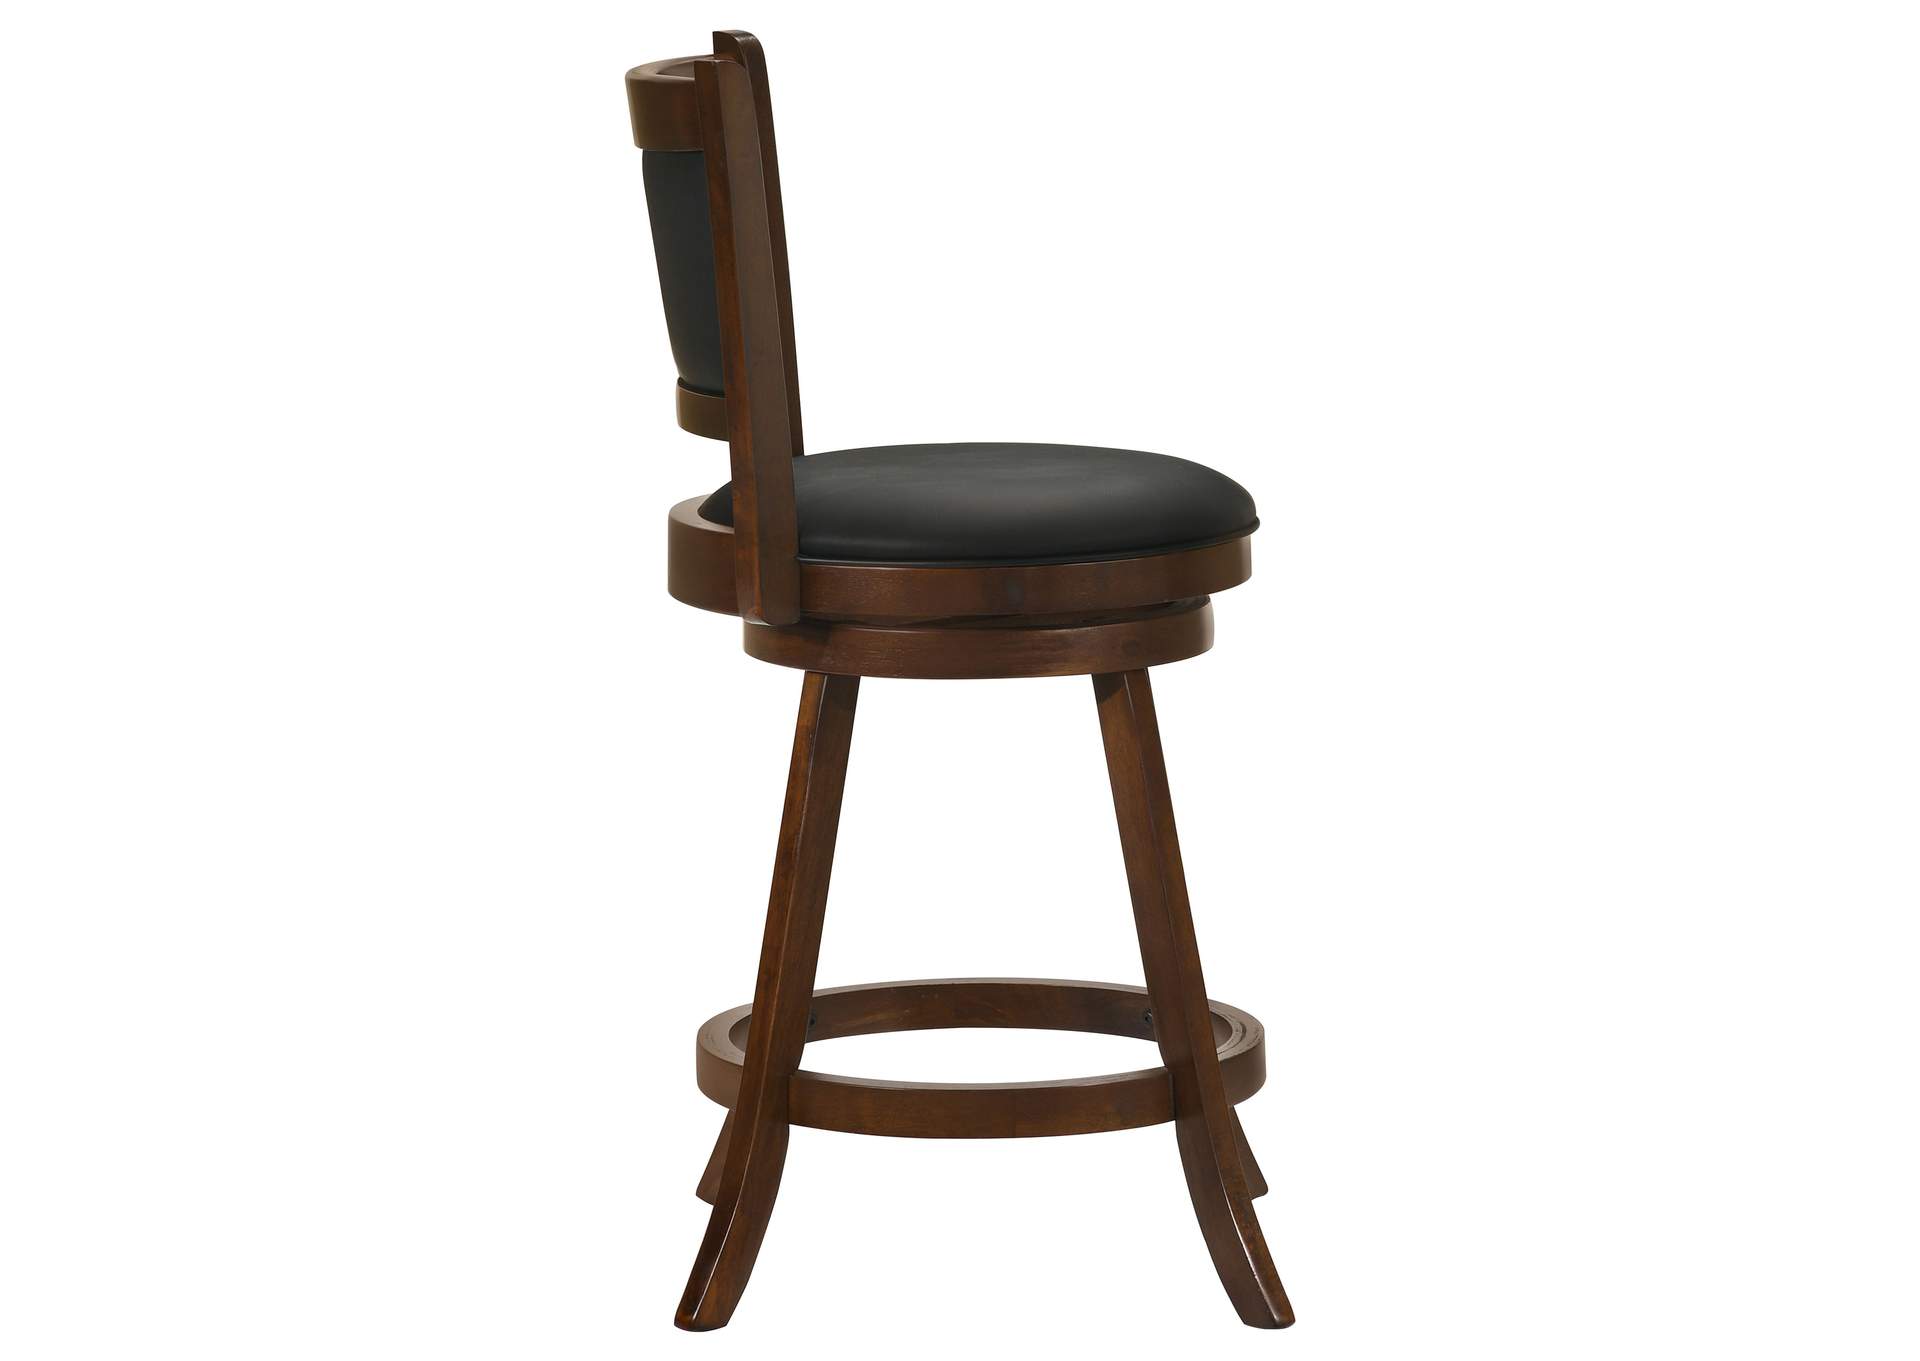 Broxton Upholstered Swivel Counter Height Stools Chestnut and Black (Set of 2),Coaster Furniture